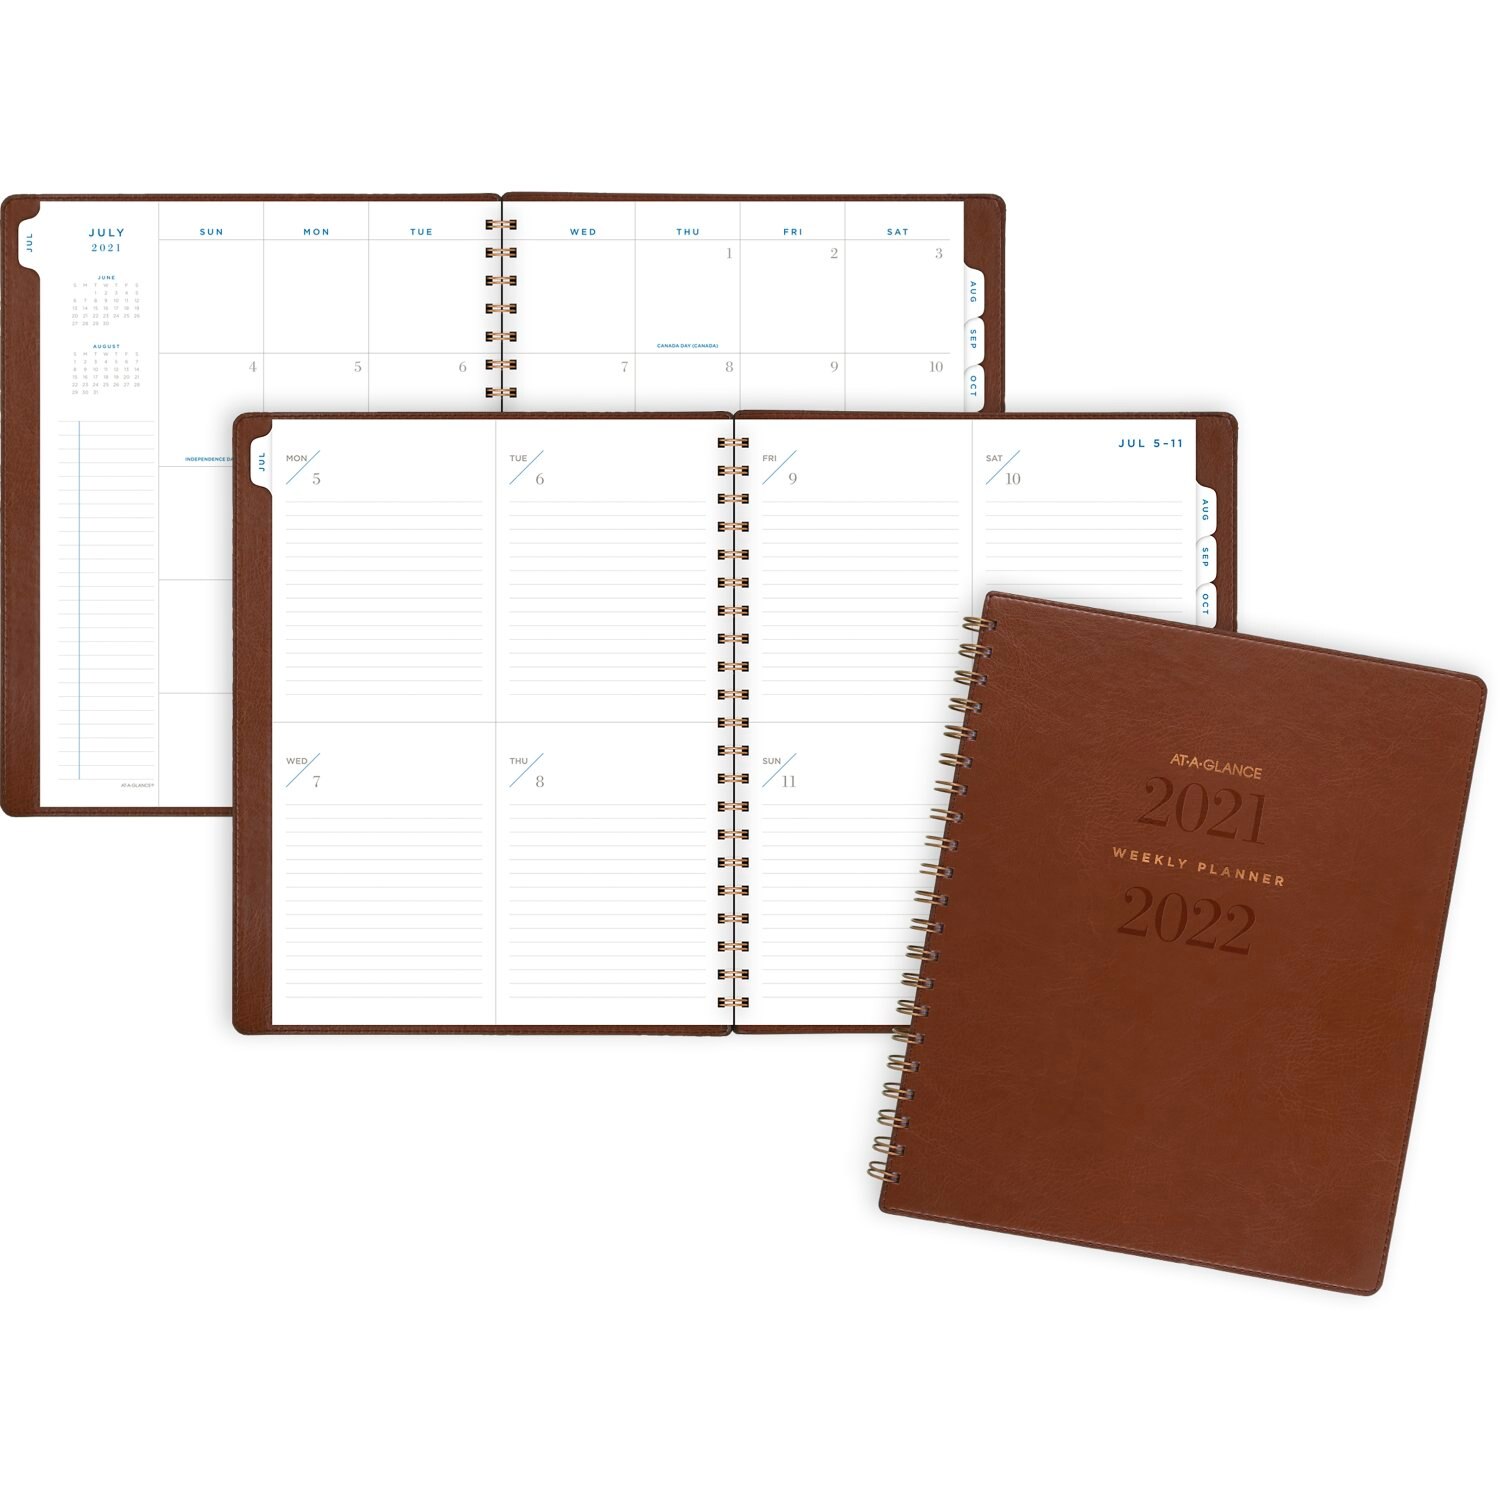 At A Glance Brown Academic Year 21-22 Planner 8x11